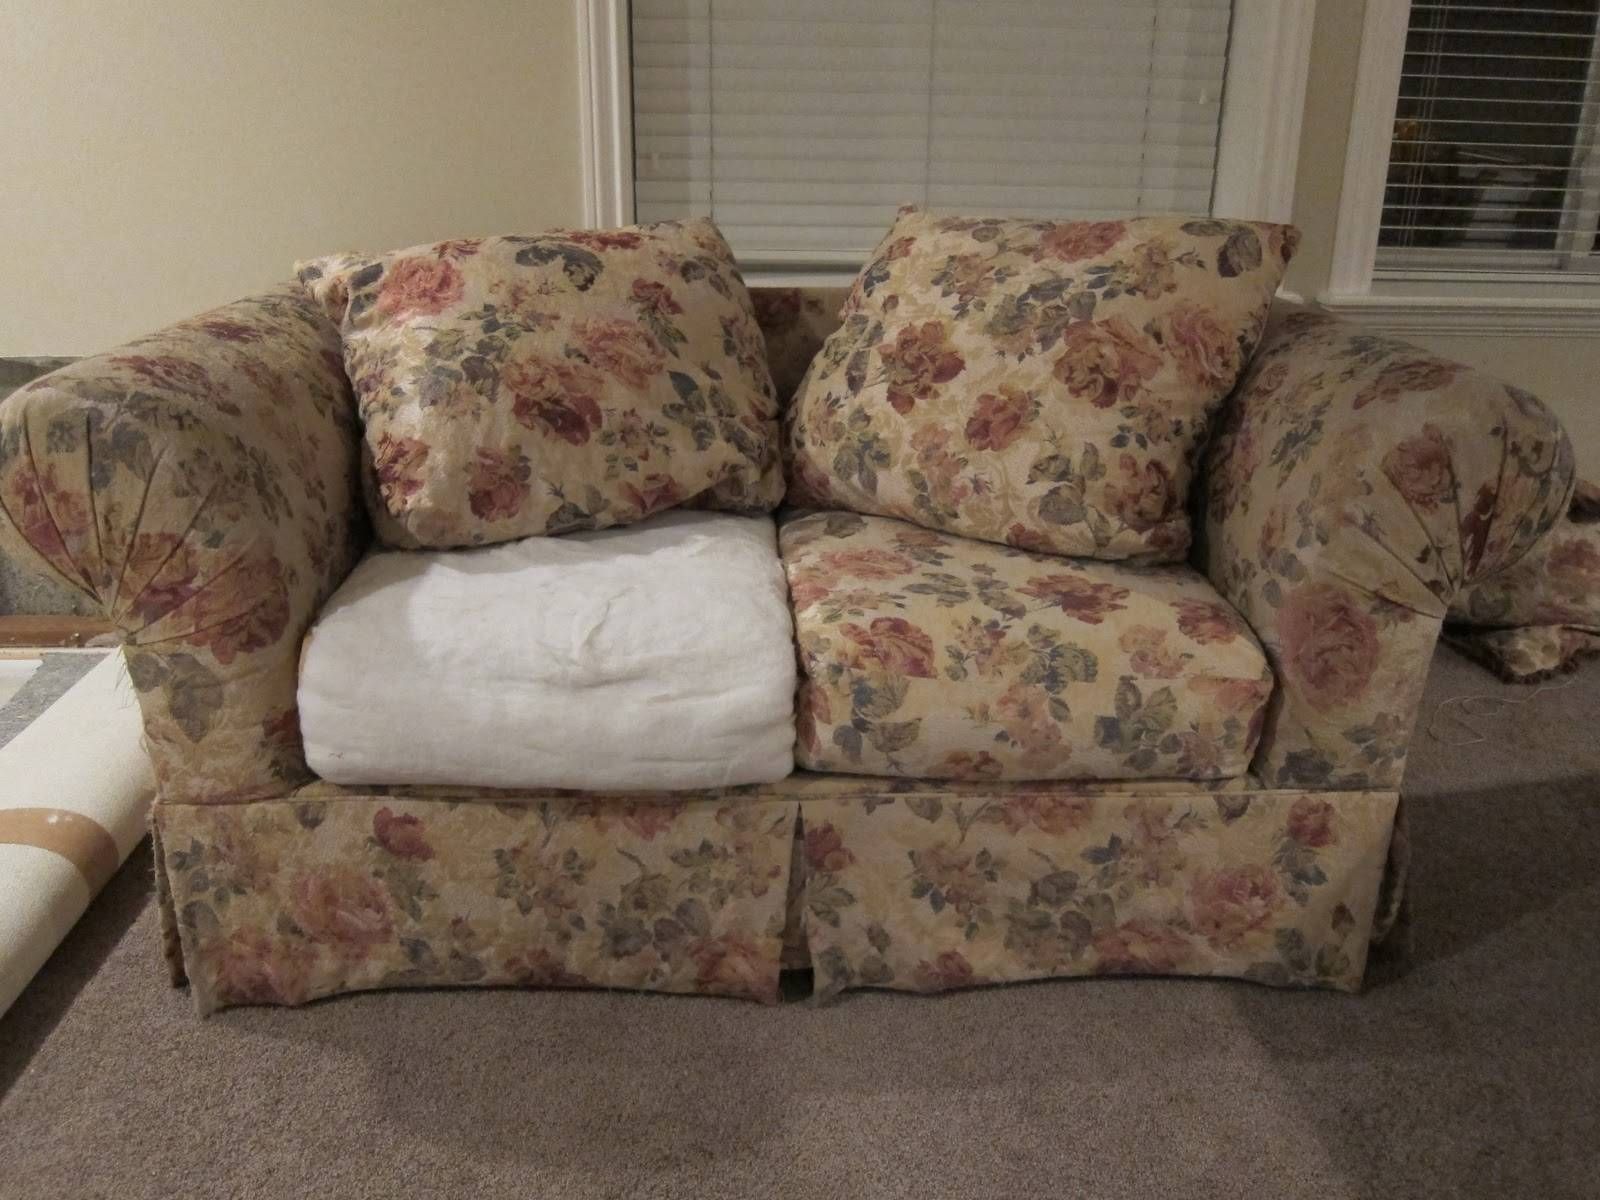 Do It Yourself Divas: Diy Strip Fabric From A Couch And Reupholster It Within Reupholster Sofas Cushions (View 2 of 15)